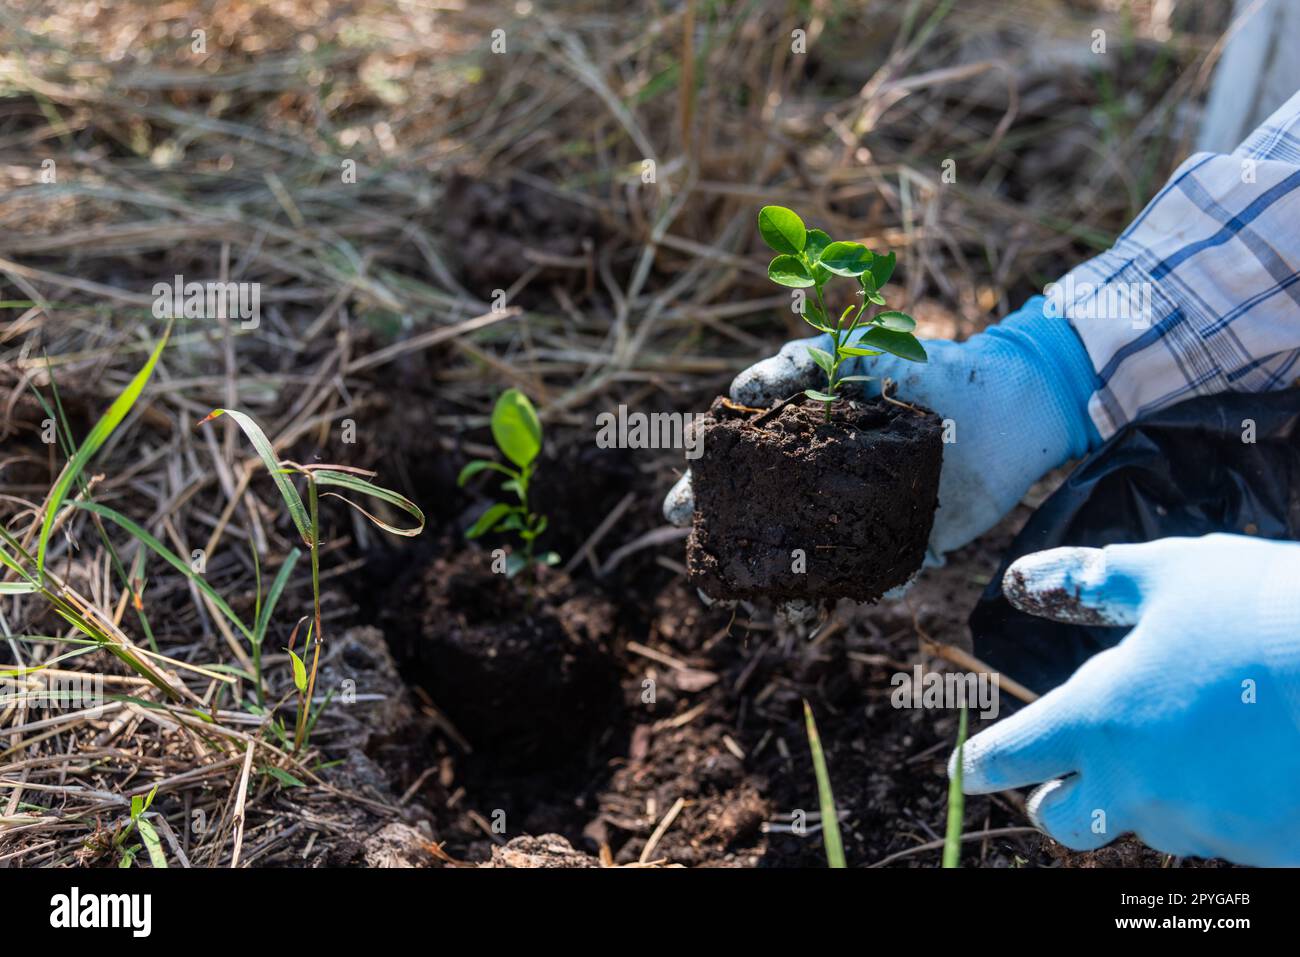 concept of hand planting trees increases oxygen and helps reduce global warming. Stock Photo